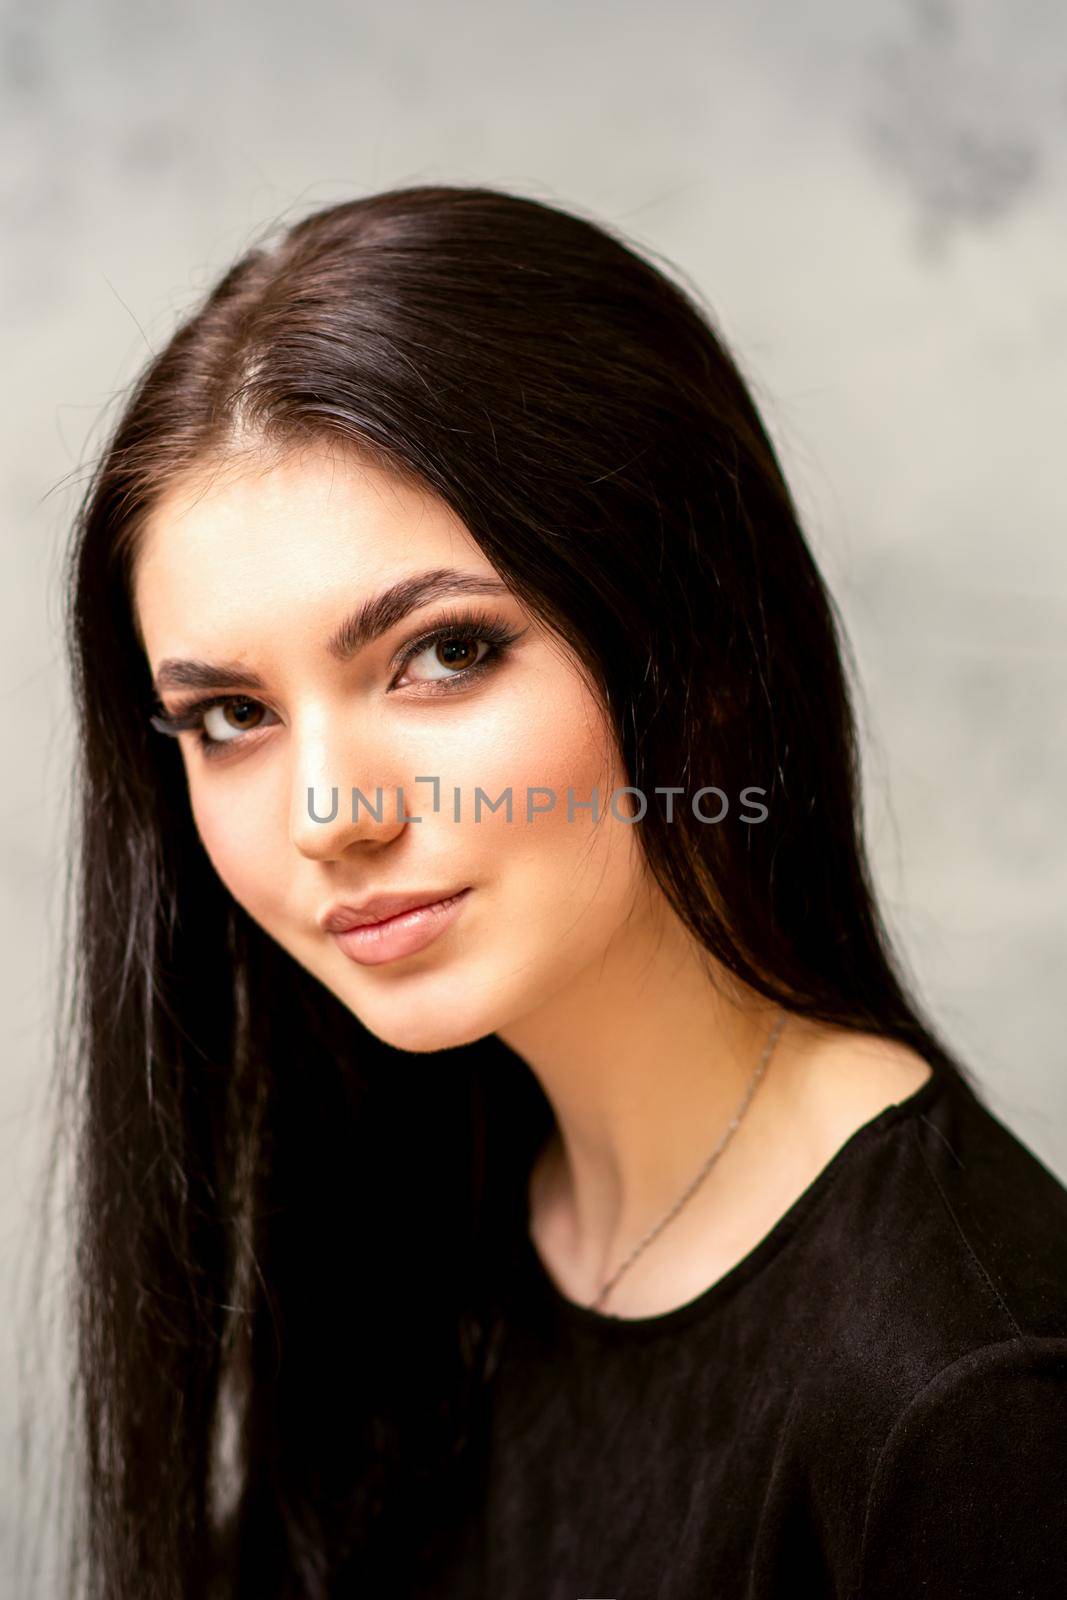 The fashionable young woman. Portrait of the beautiful female model with long hair and makeup. Beauty young caucasian woman with a black hairstyle. by okskukuruza